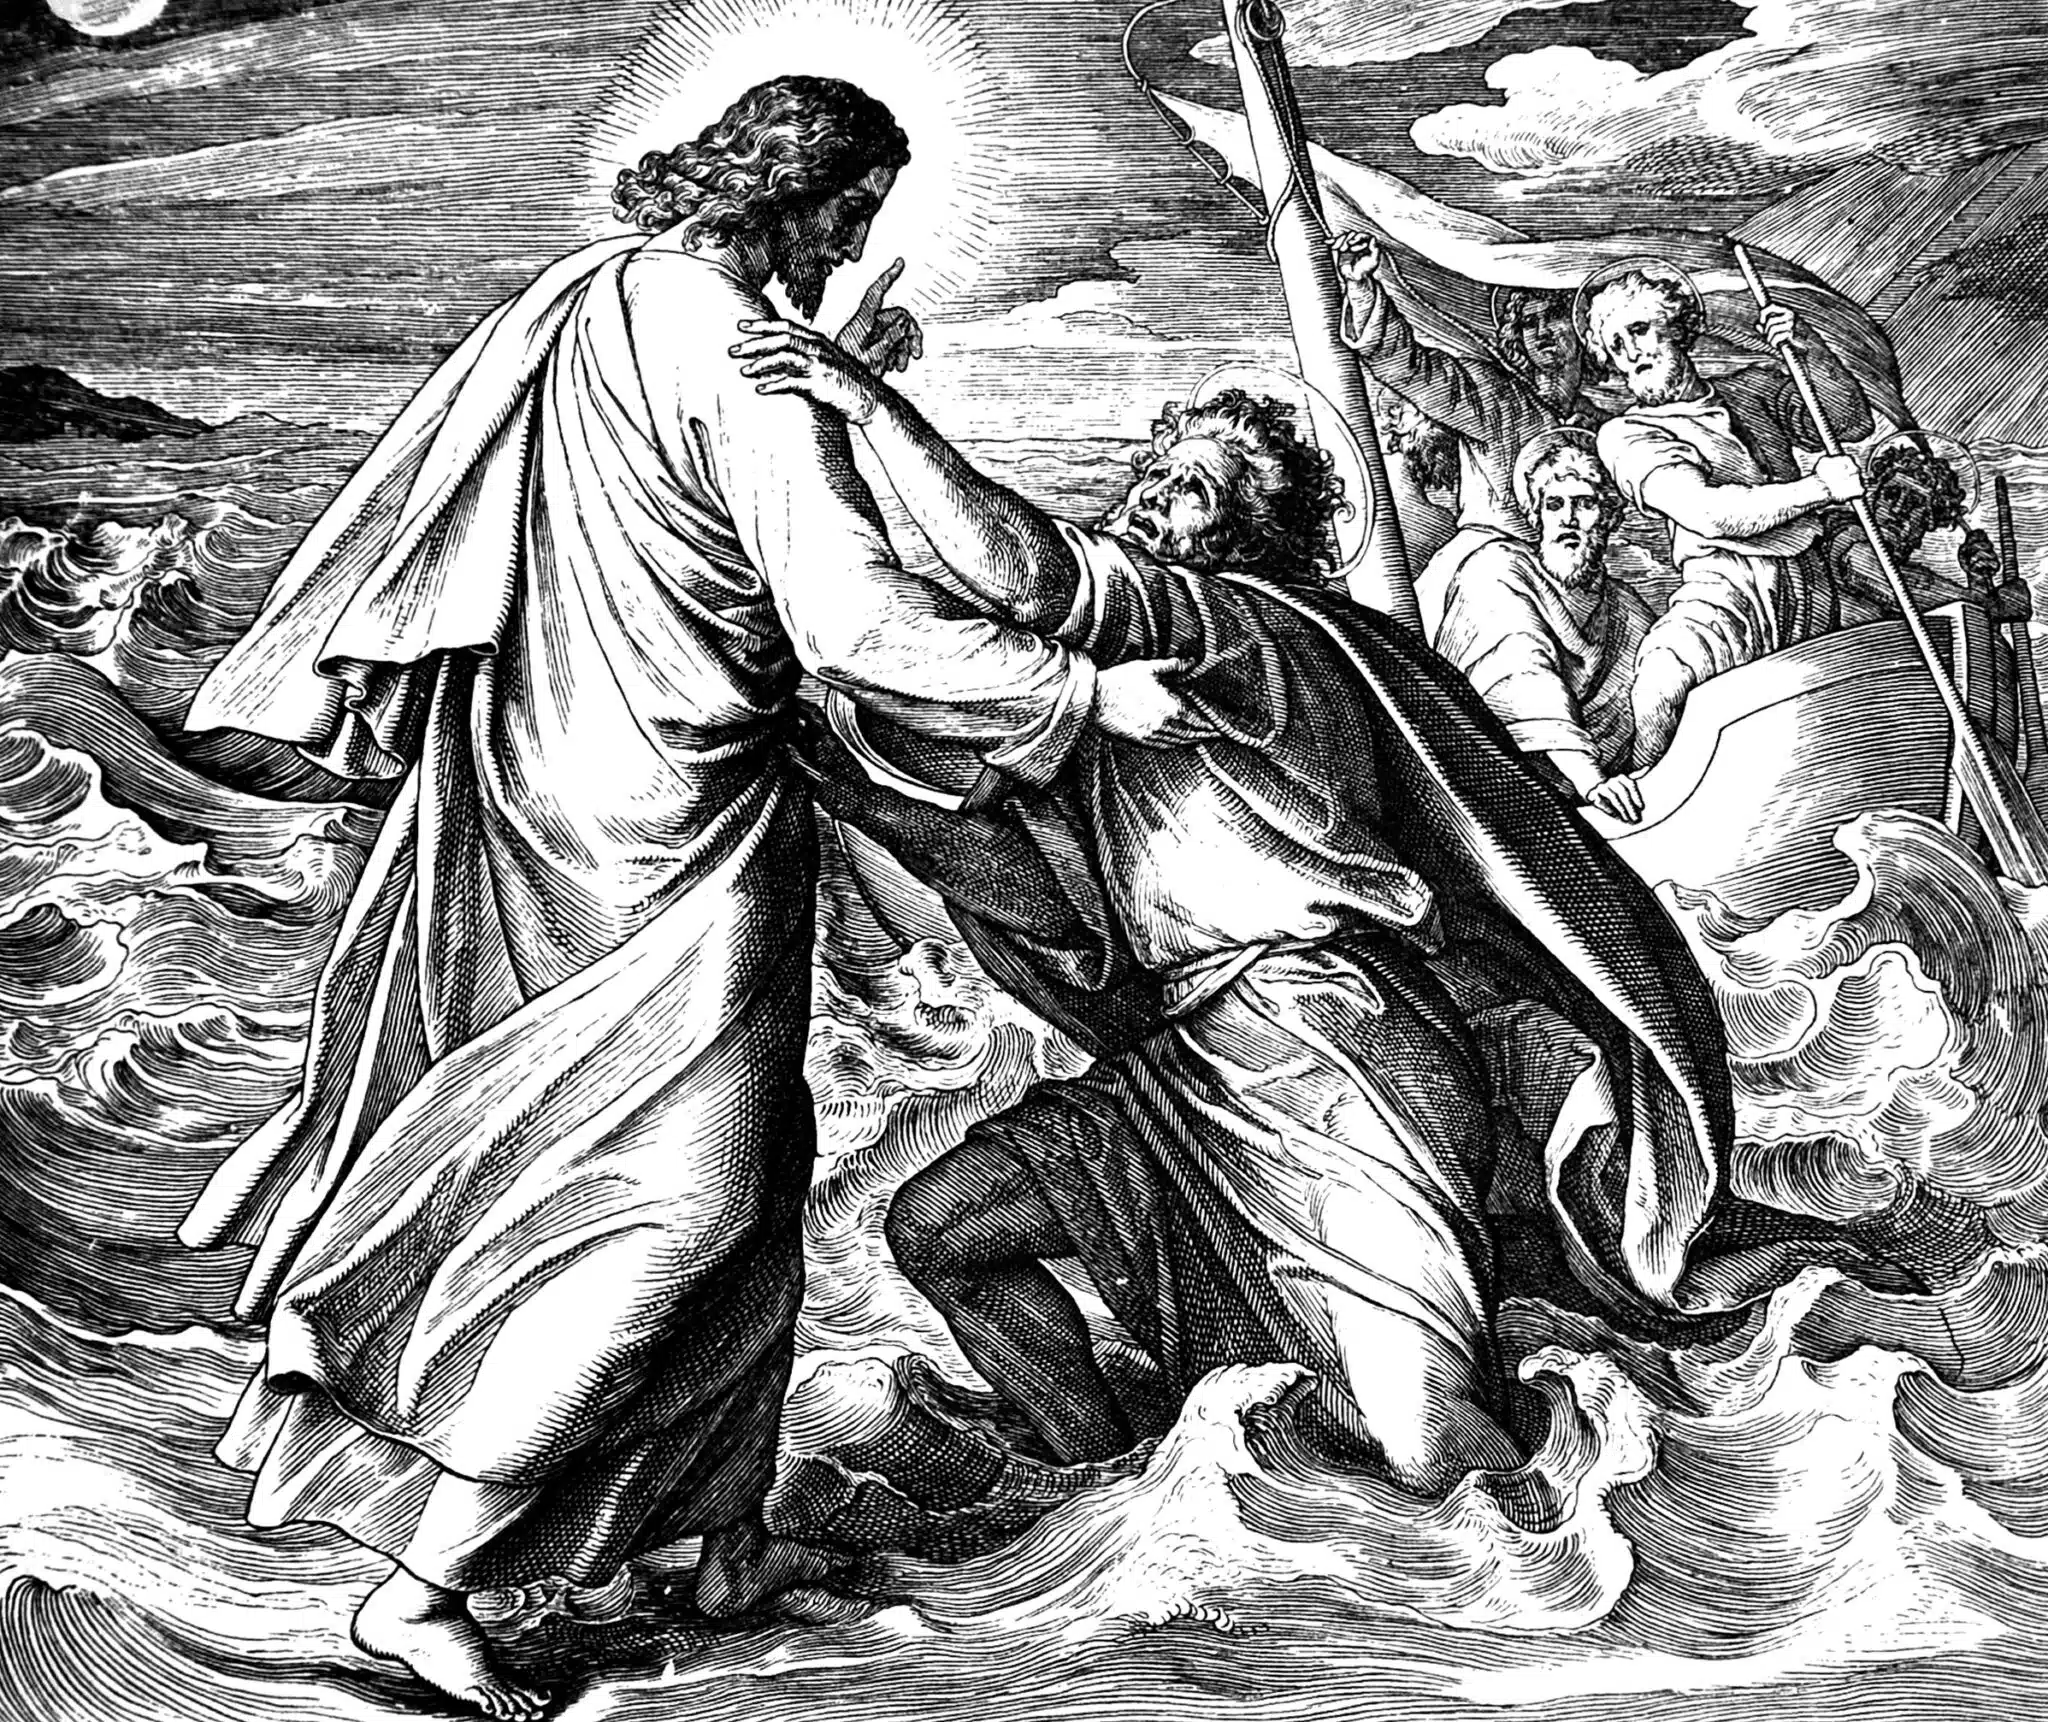 Jesus saves peter from drowning